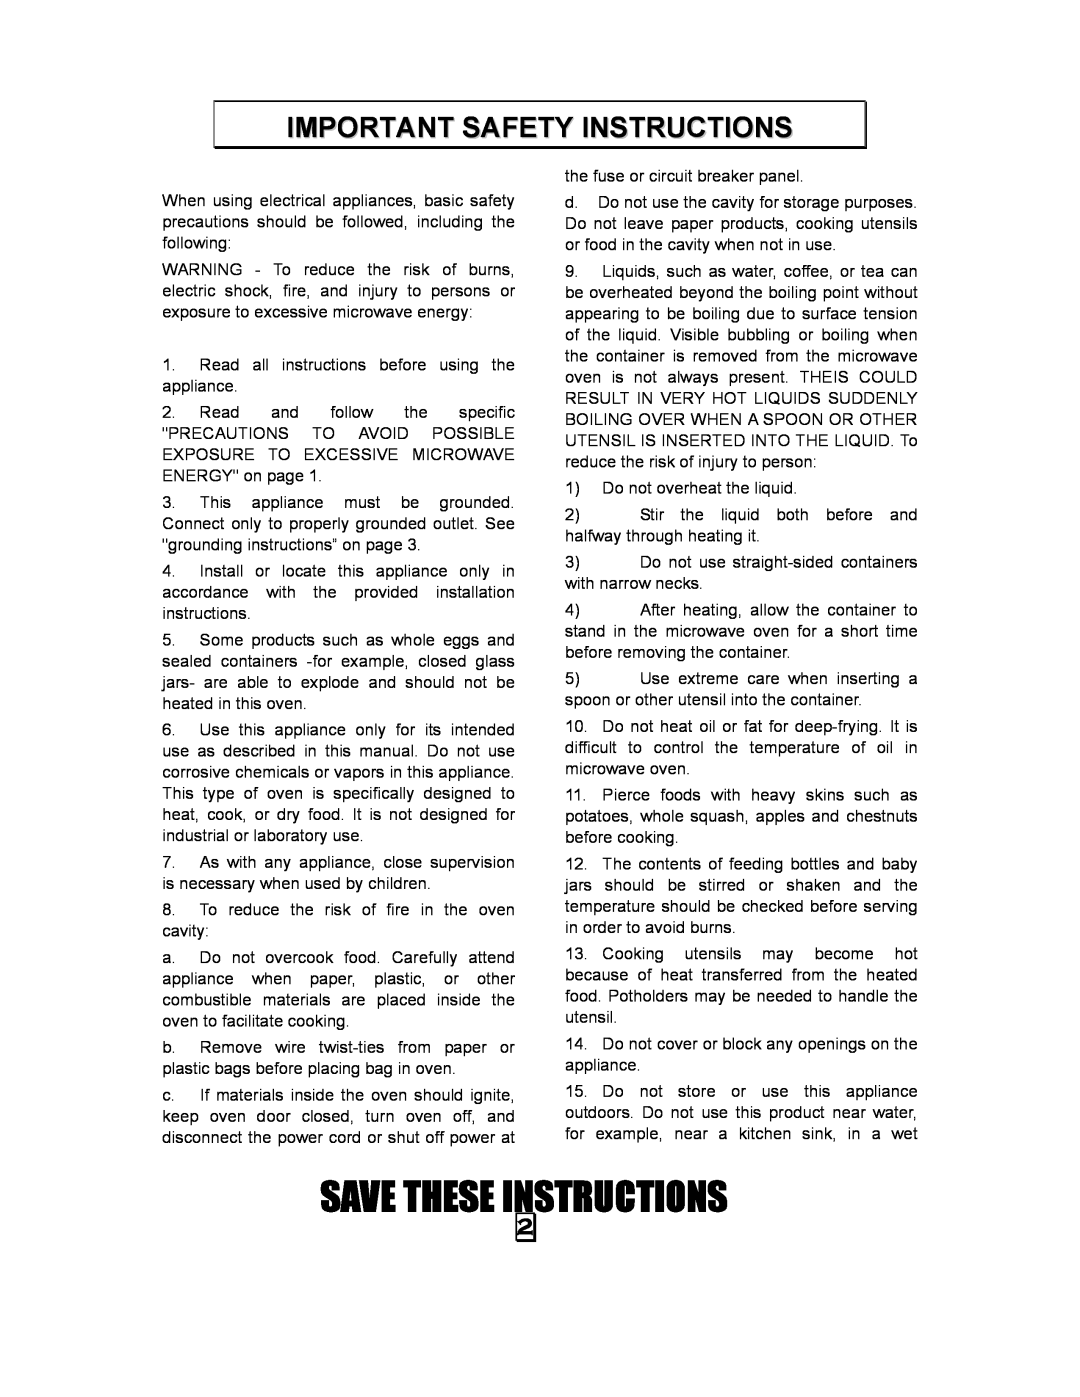 RCA RMW968 manual Save These Instructions, Important Safety Instructions 